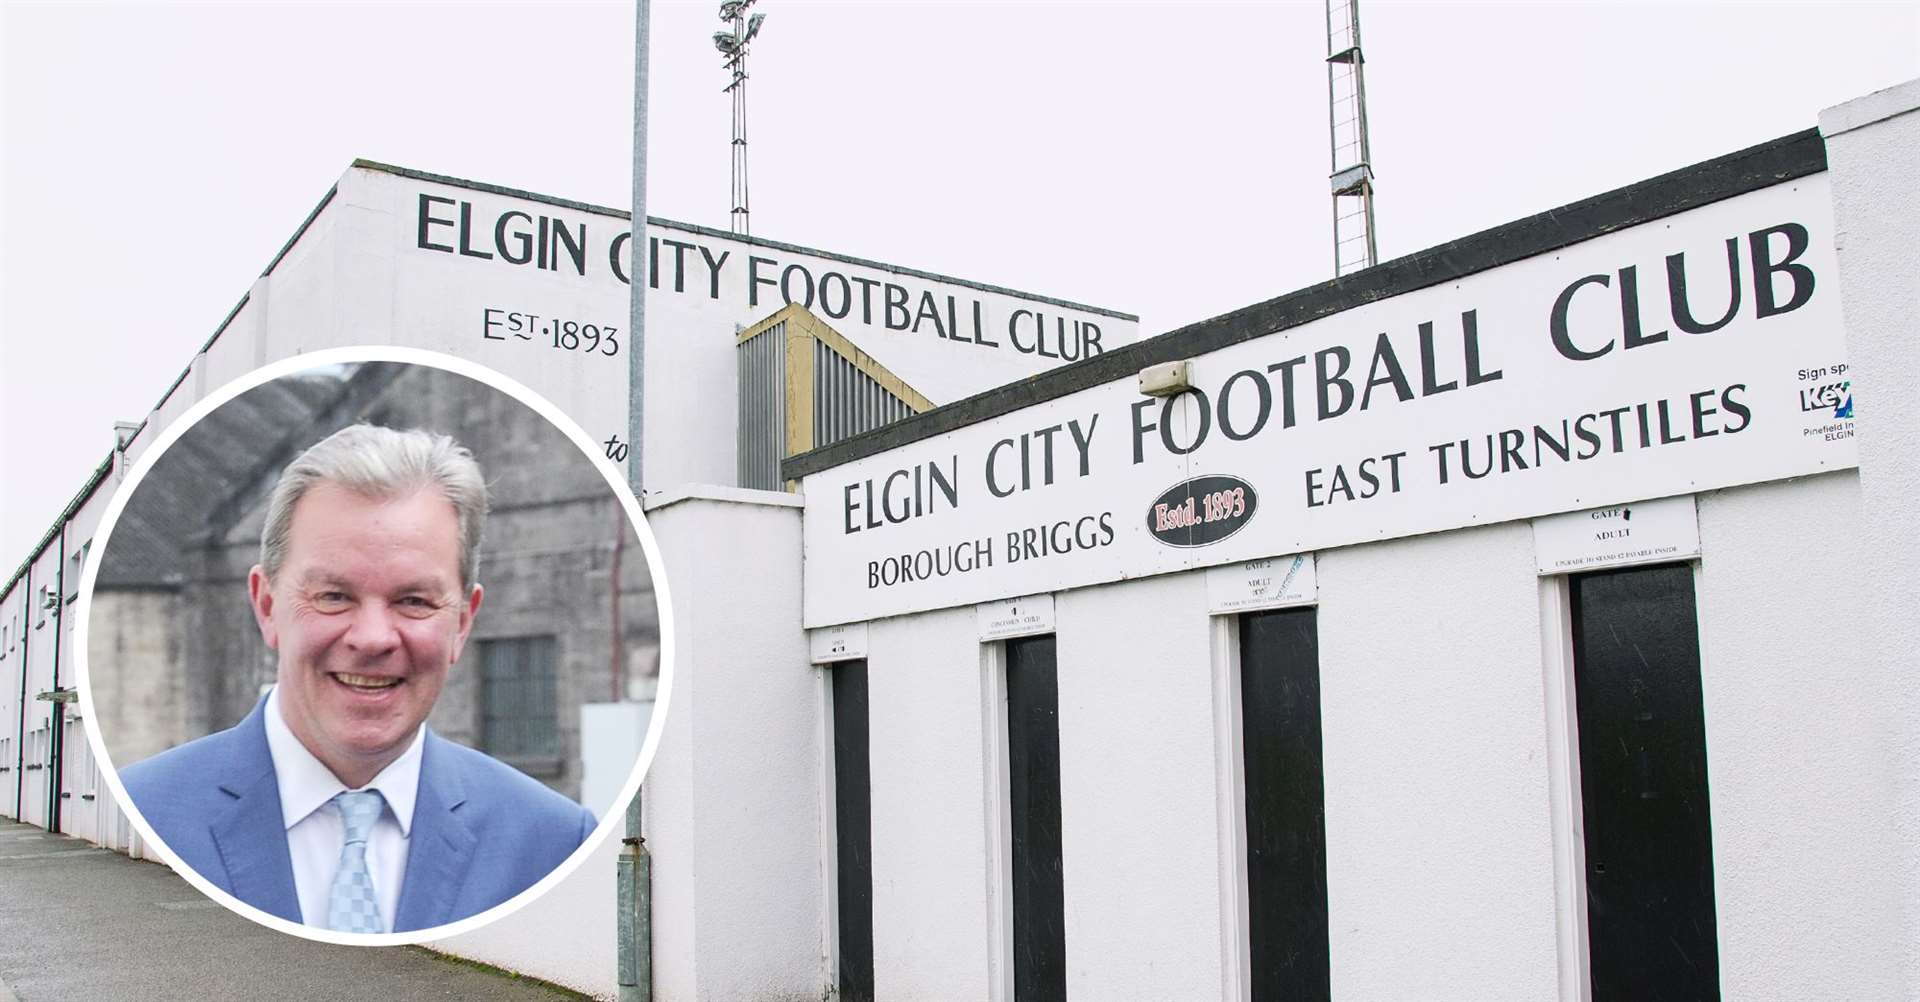 Director Stephen Scott has quit the Elgin City board and withdrawn his sponsorship deal.